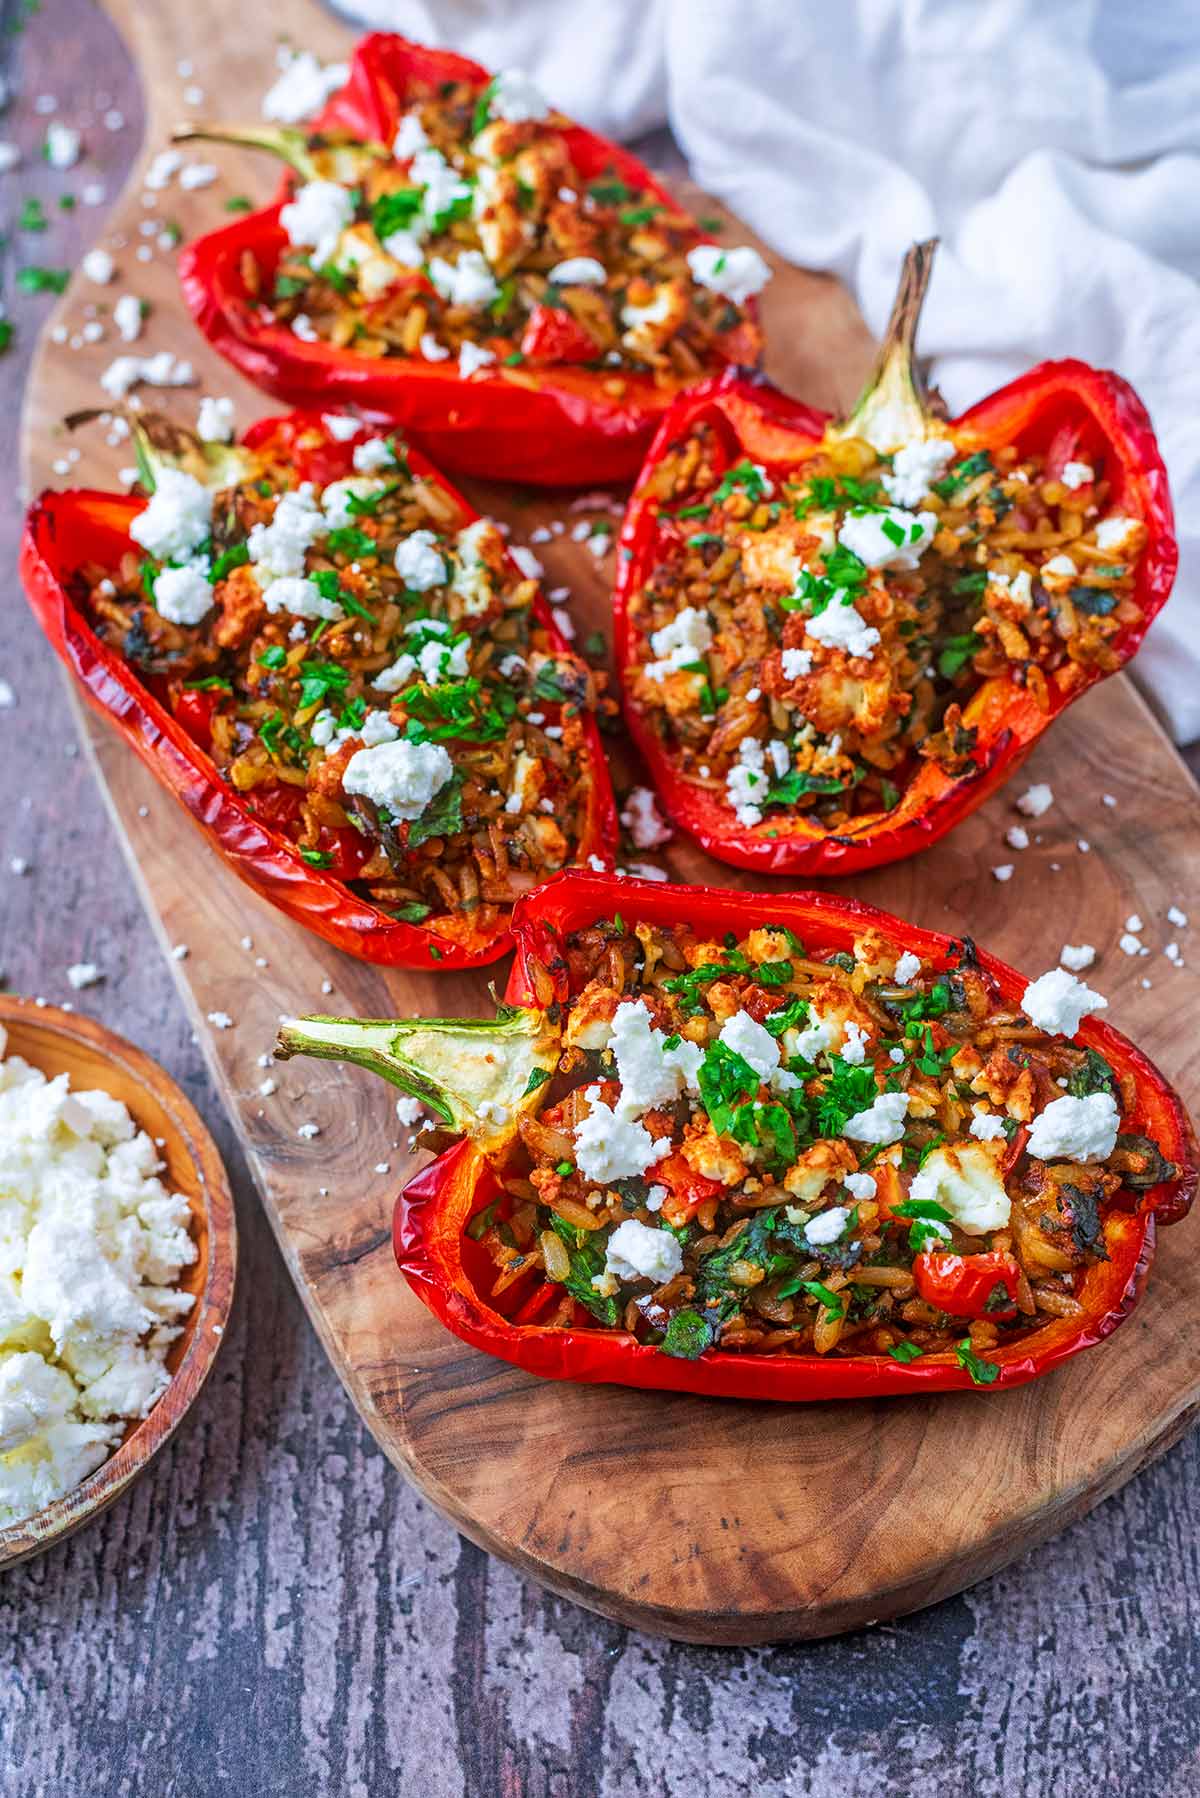 Stuffed red pepper halves on a board next to a small bowl of feta cheese.